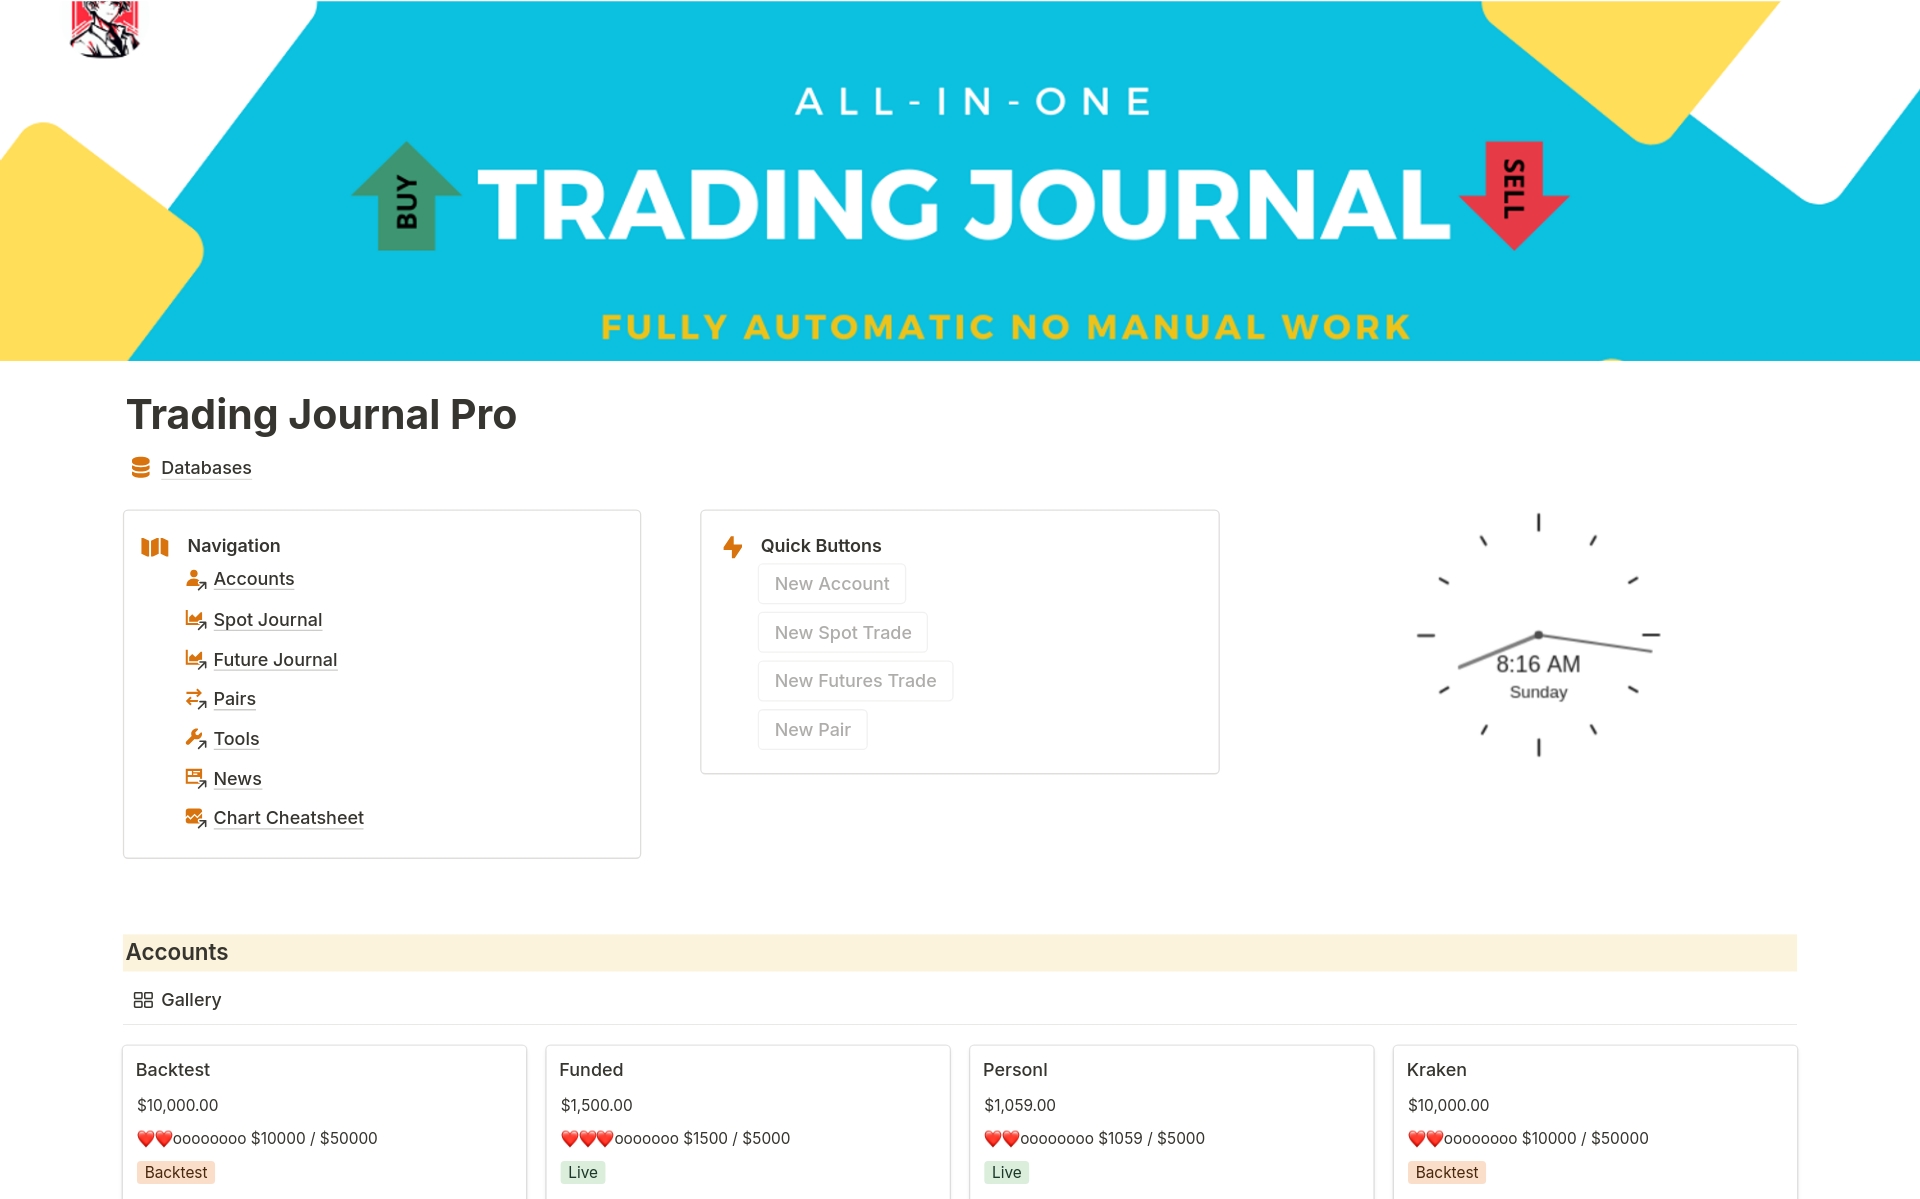 All-in-one Trading Journalのテンプレートのプレビュー